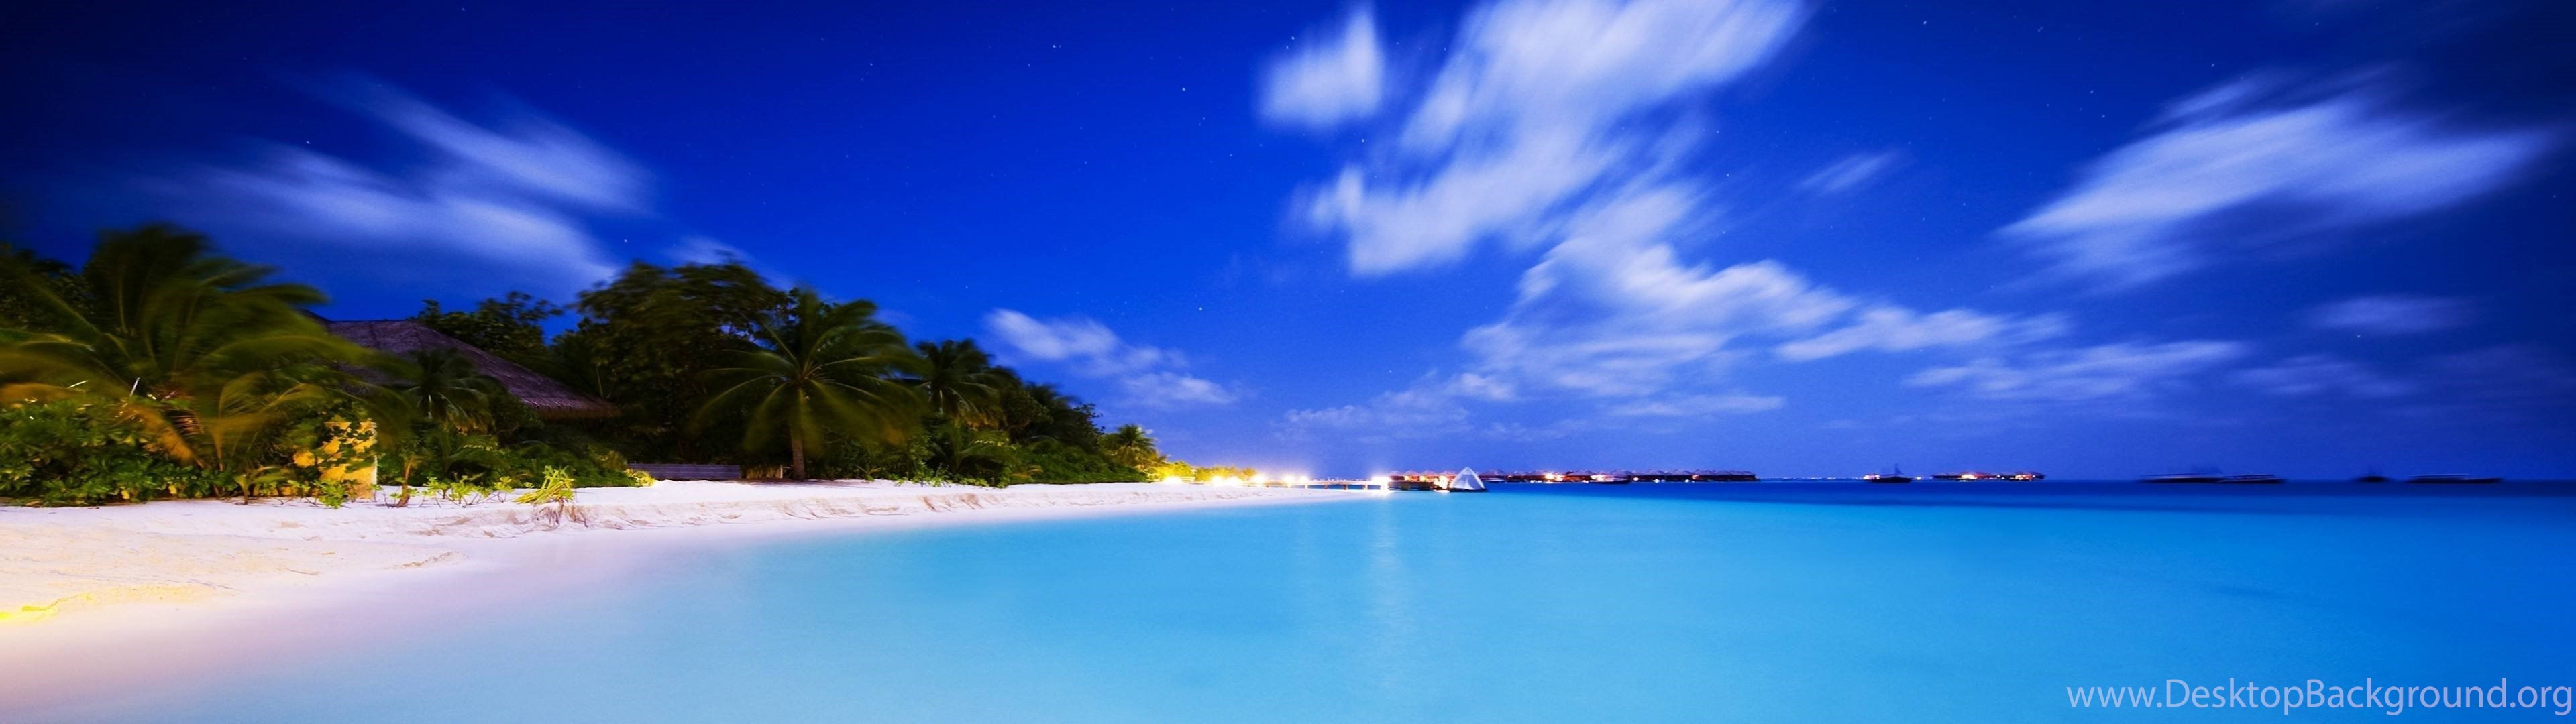 Free download 3840 X 1080 Beach Wallpapers Top Free 3840 X 1080 Beach